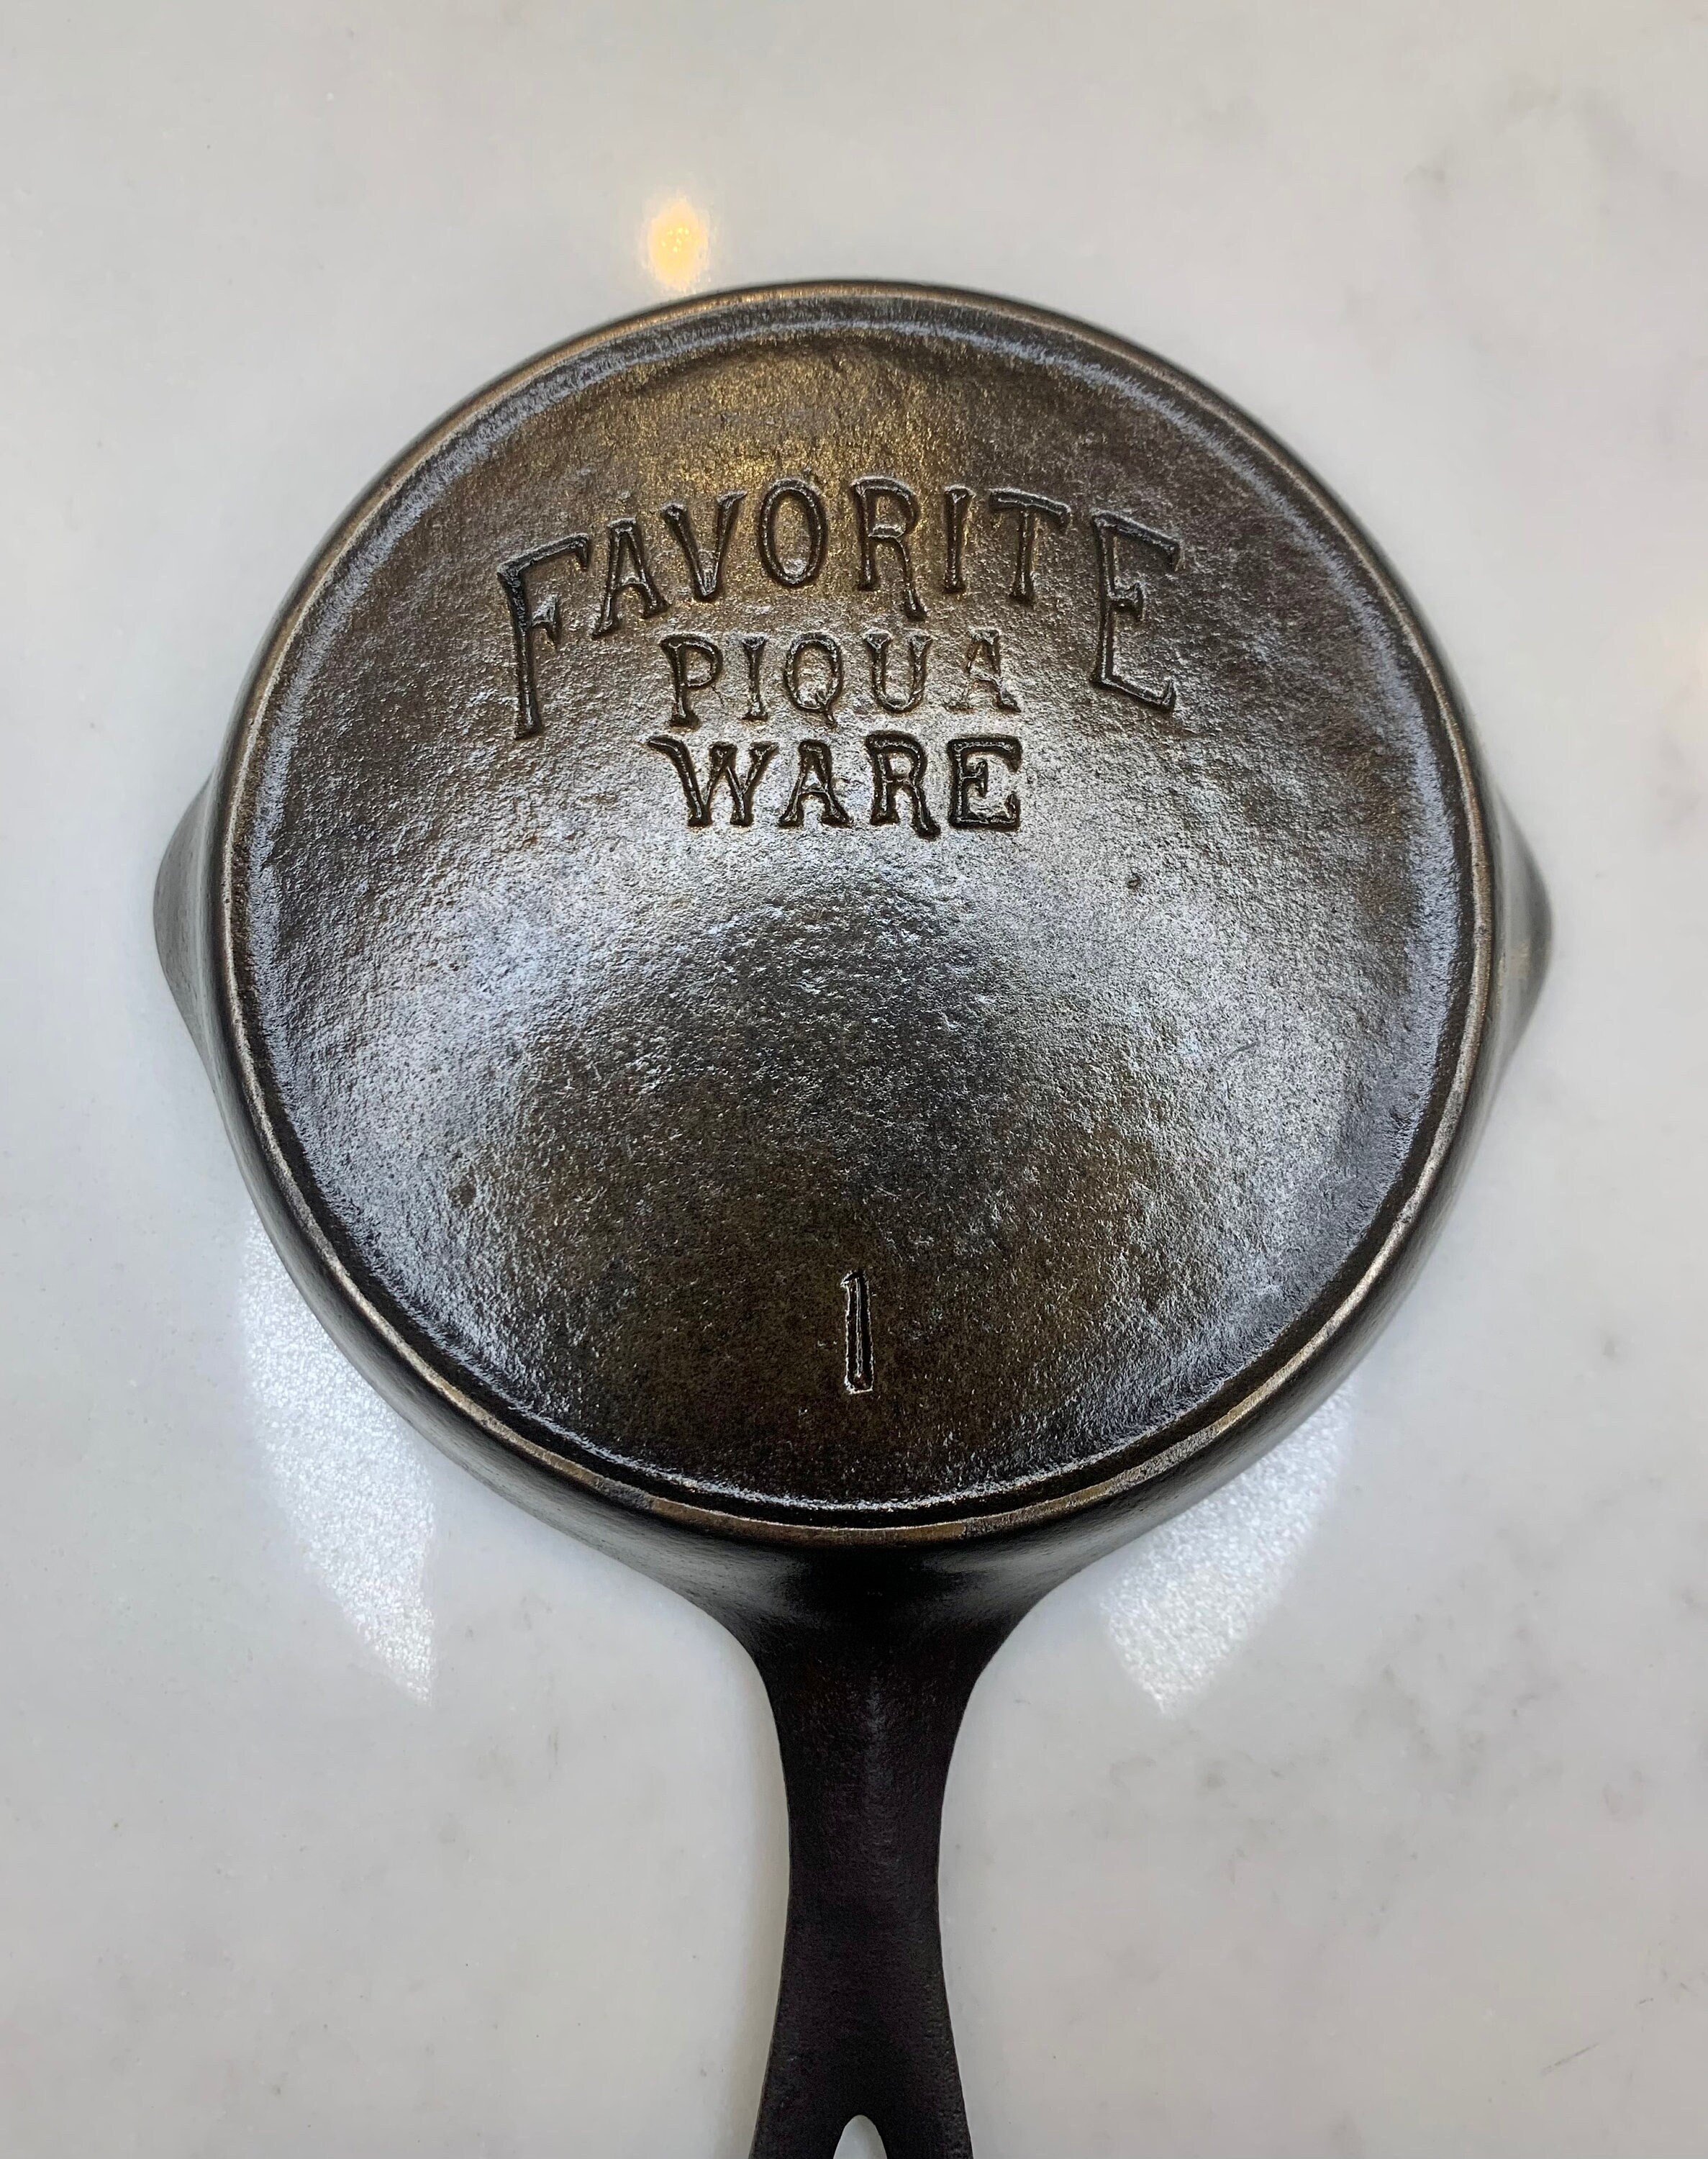 Cast Iron Cookware Favorite Piqua Ware No 9 Skillet #15 –  TheDepot.LakeviewOhio